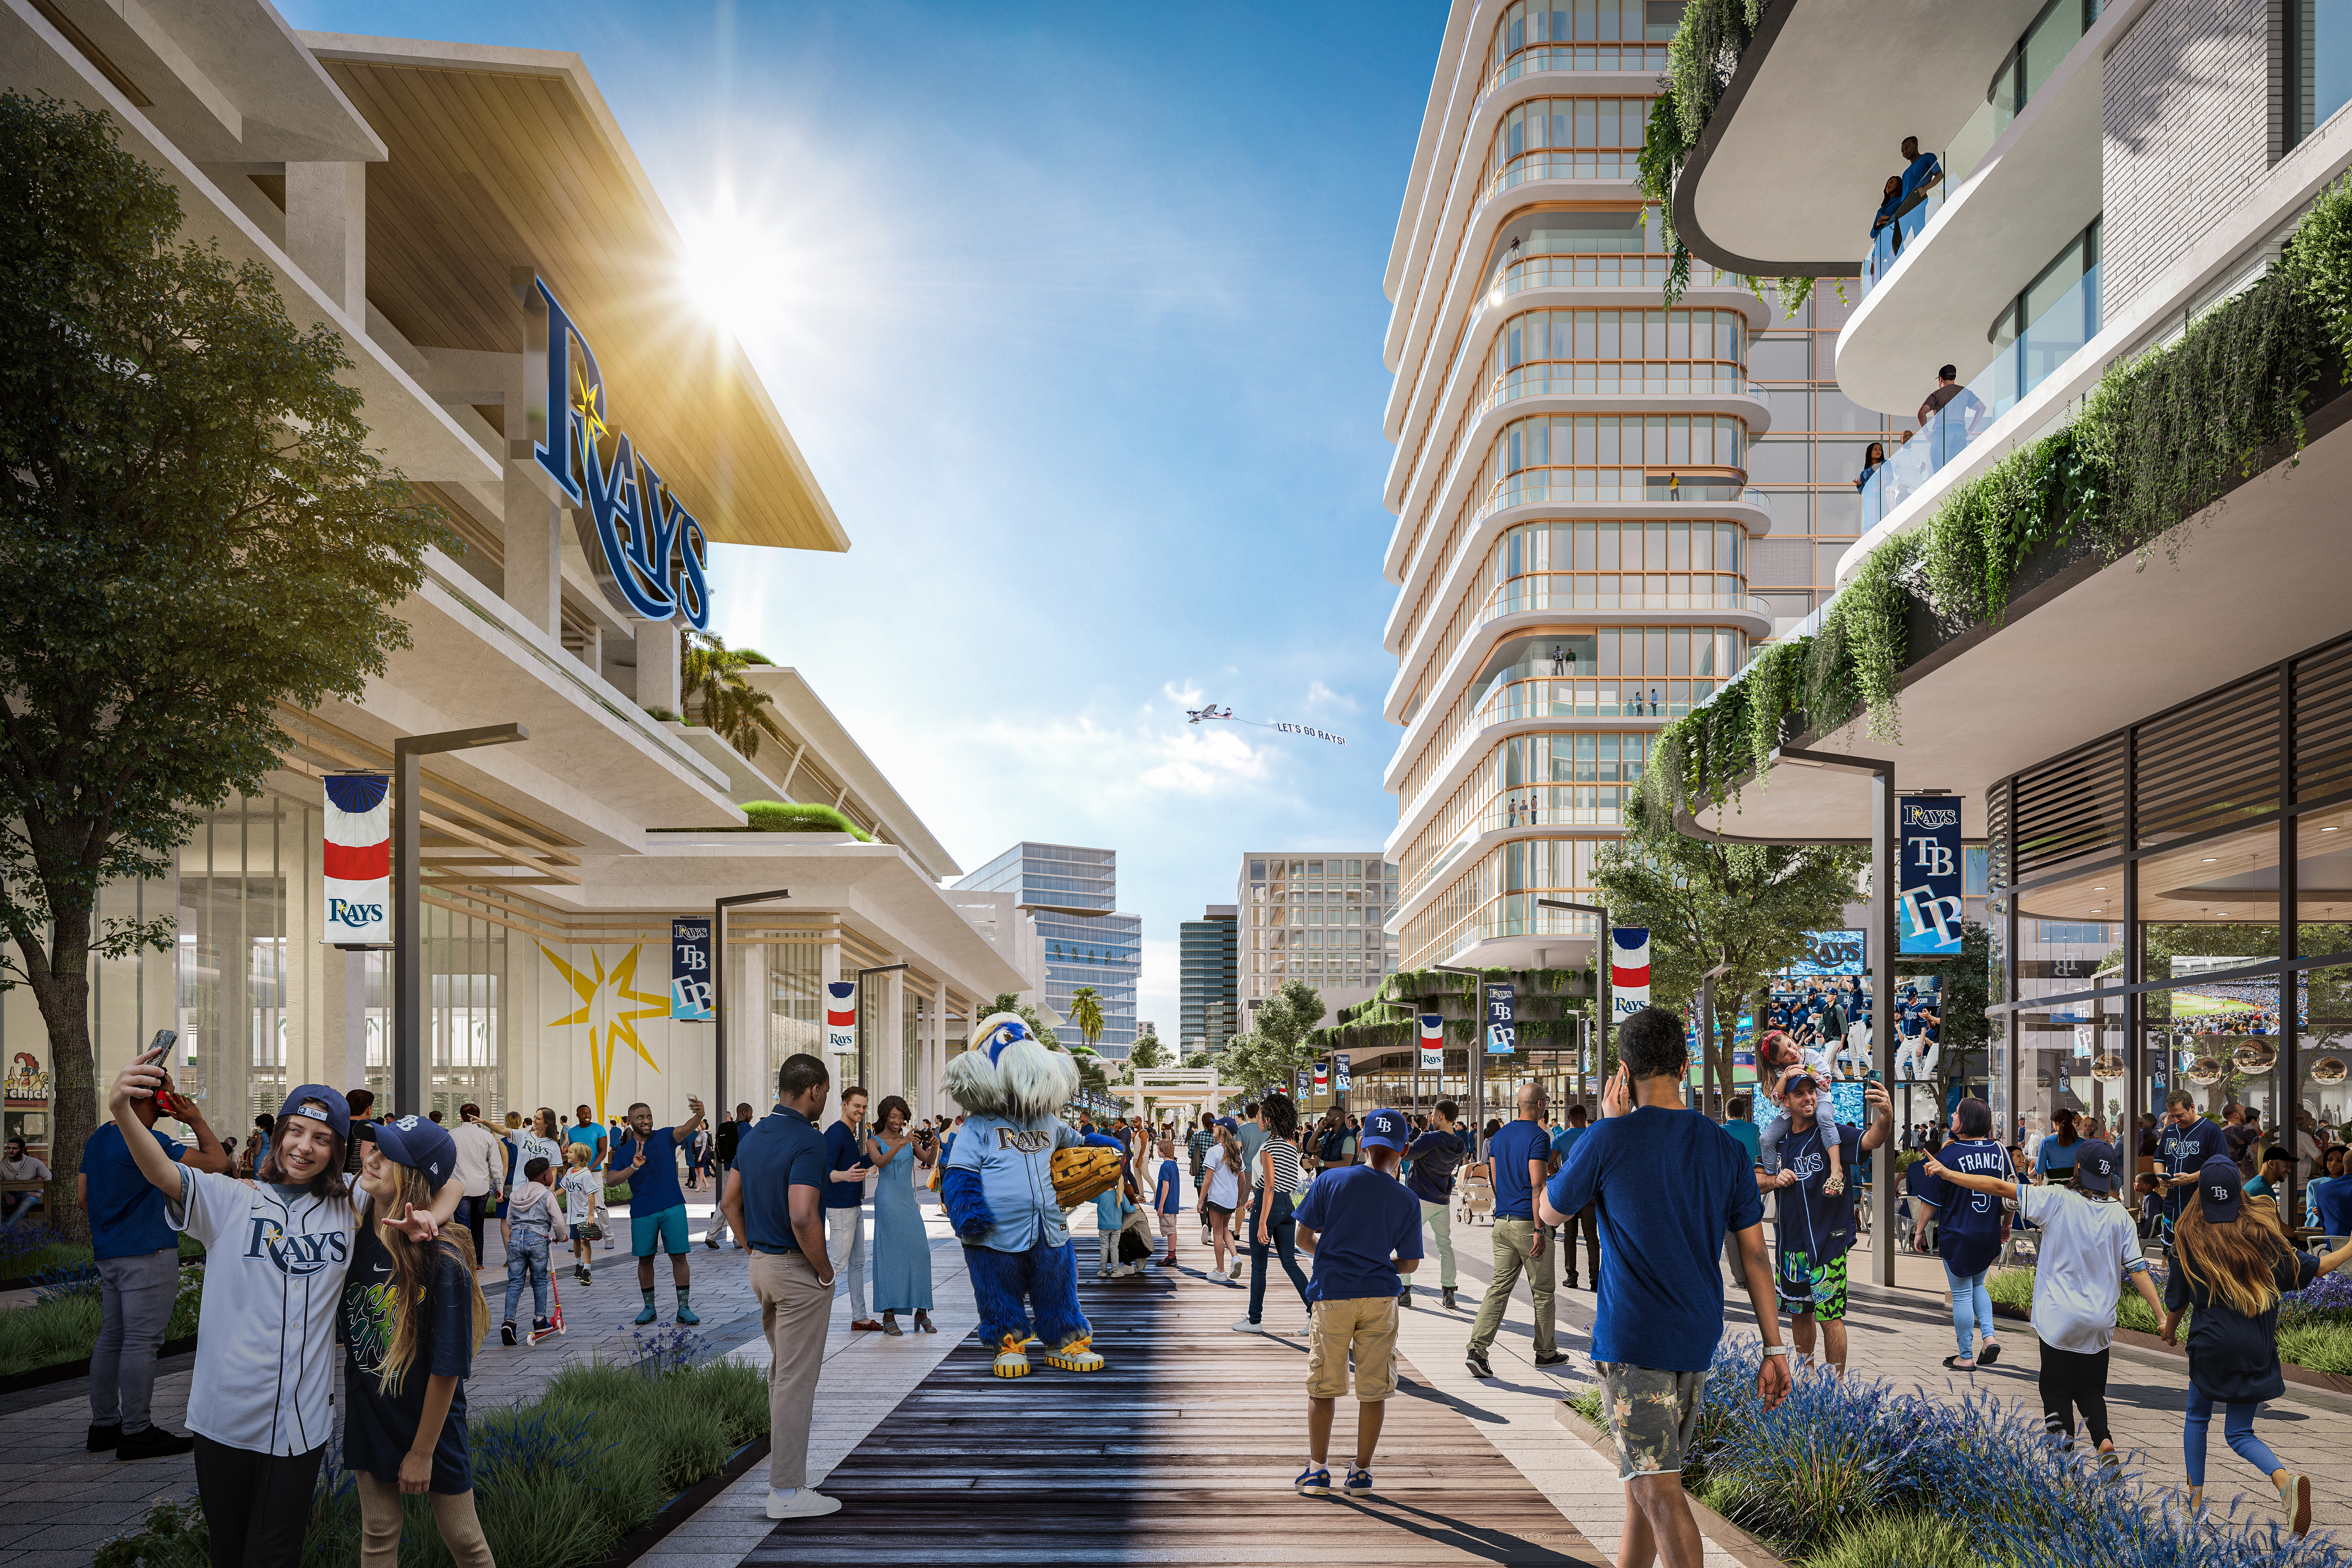 Tampa Bay Rays stadium design images released - DRaysBay